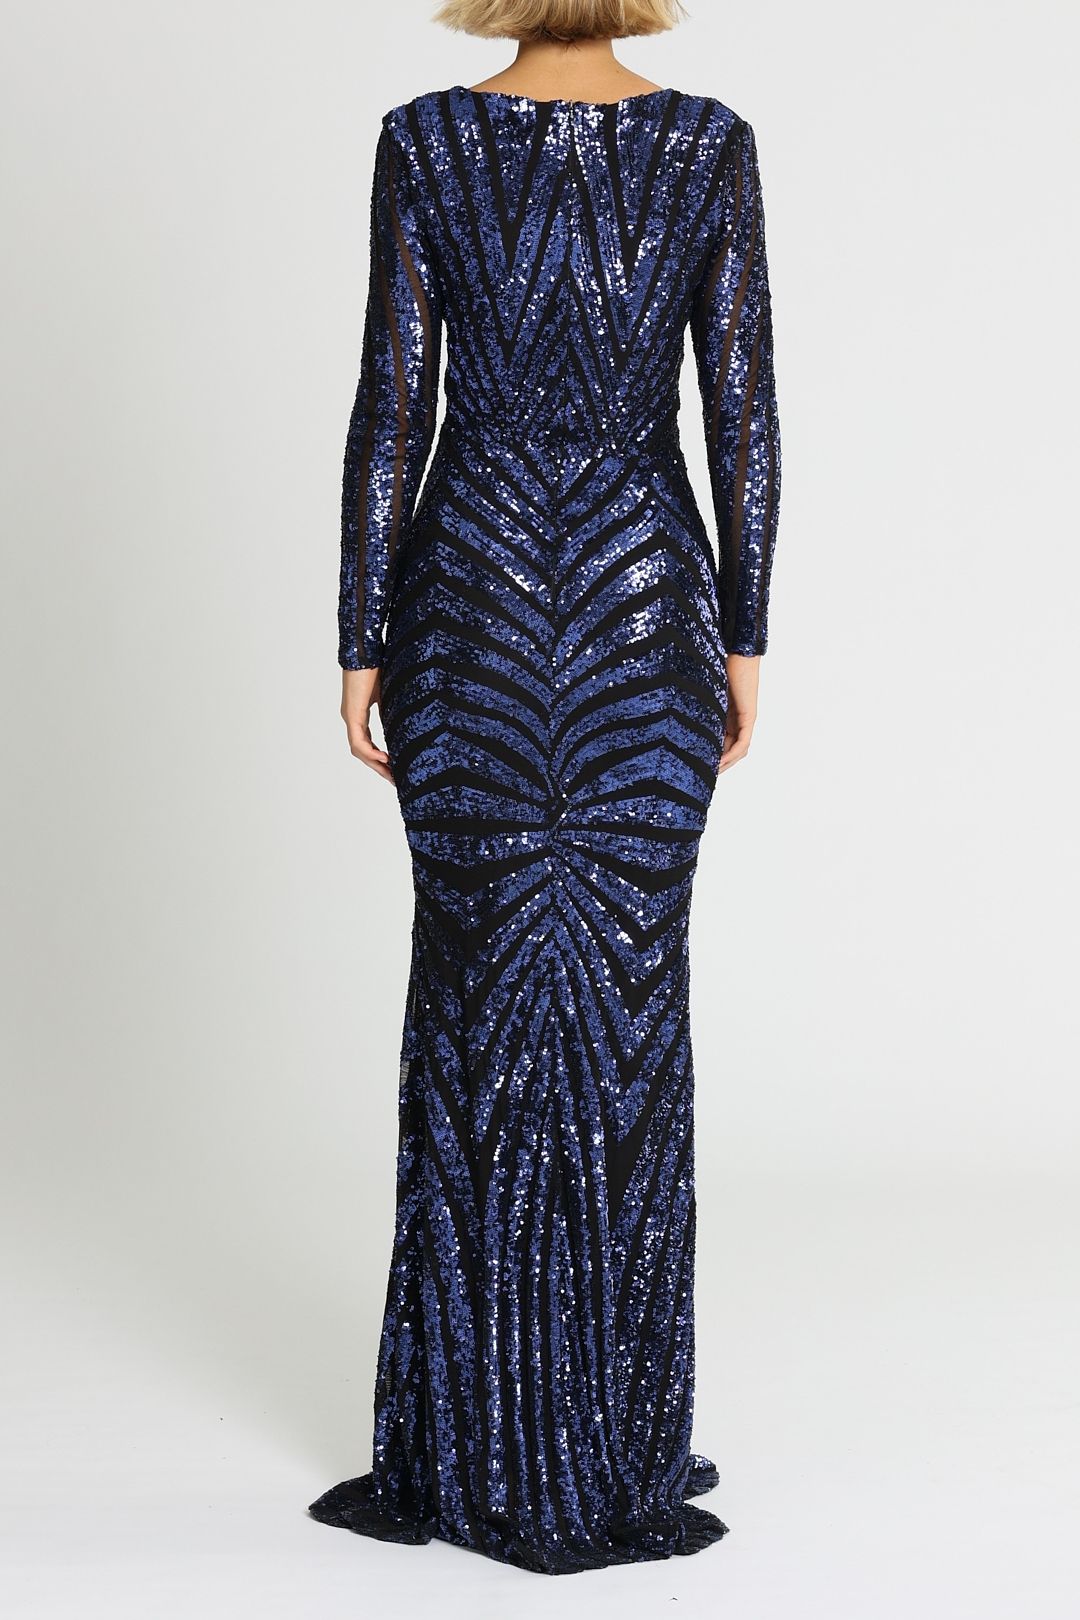 Ae'lkemi Art Deco Sequin Gown Navy Long Sleeves